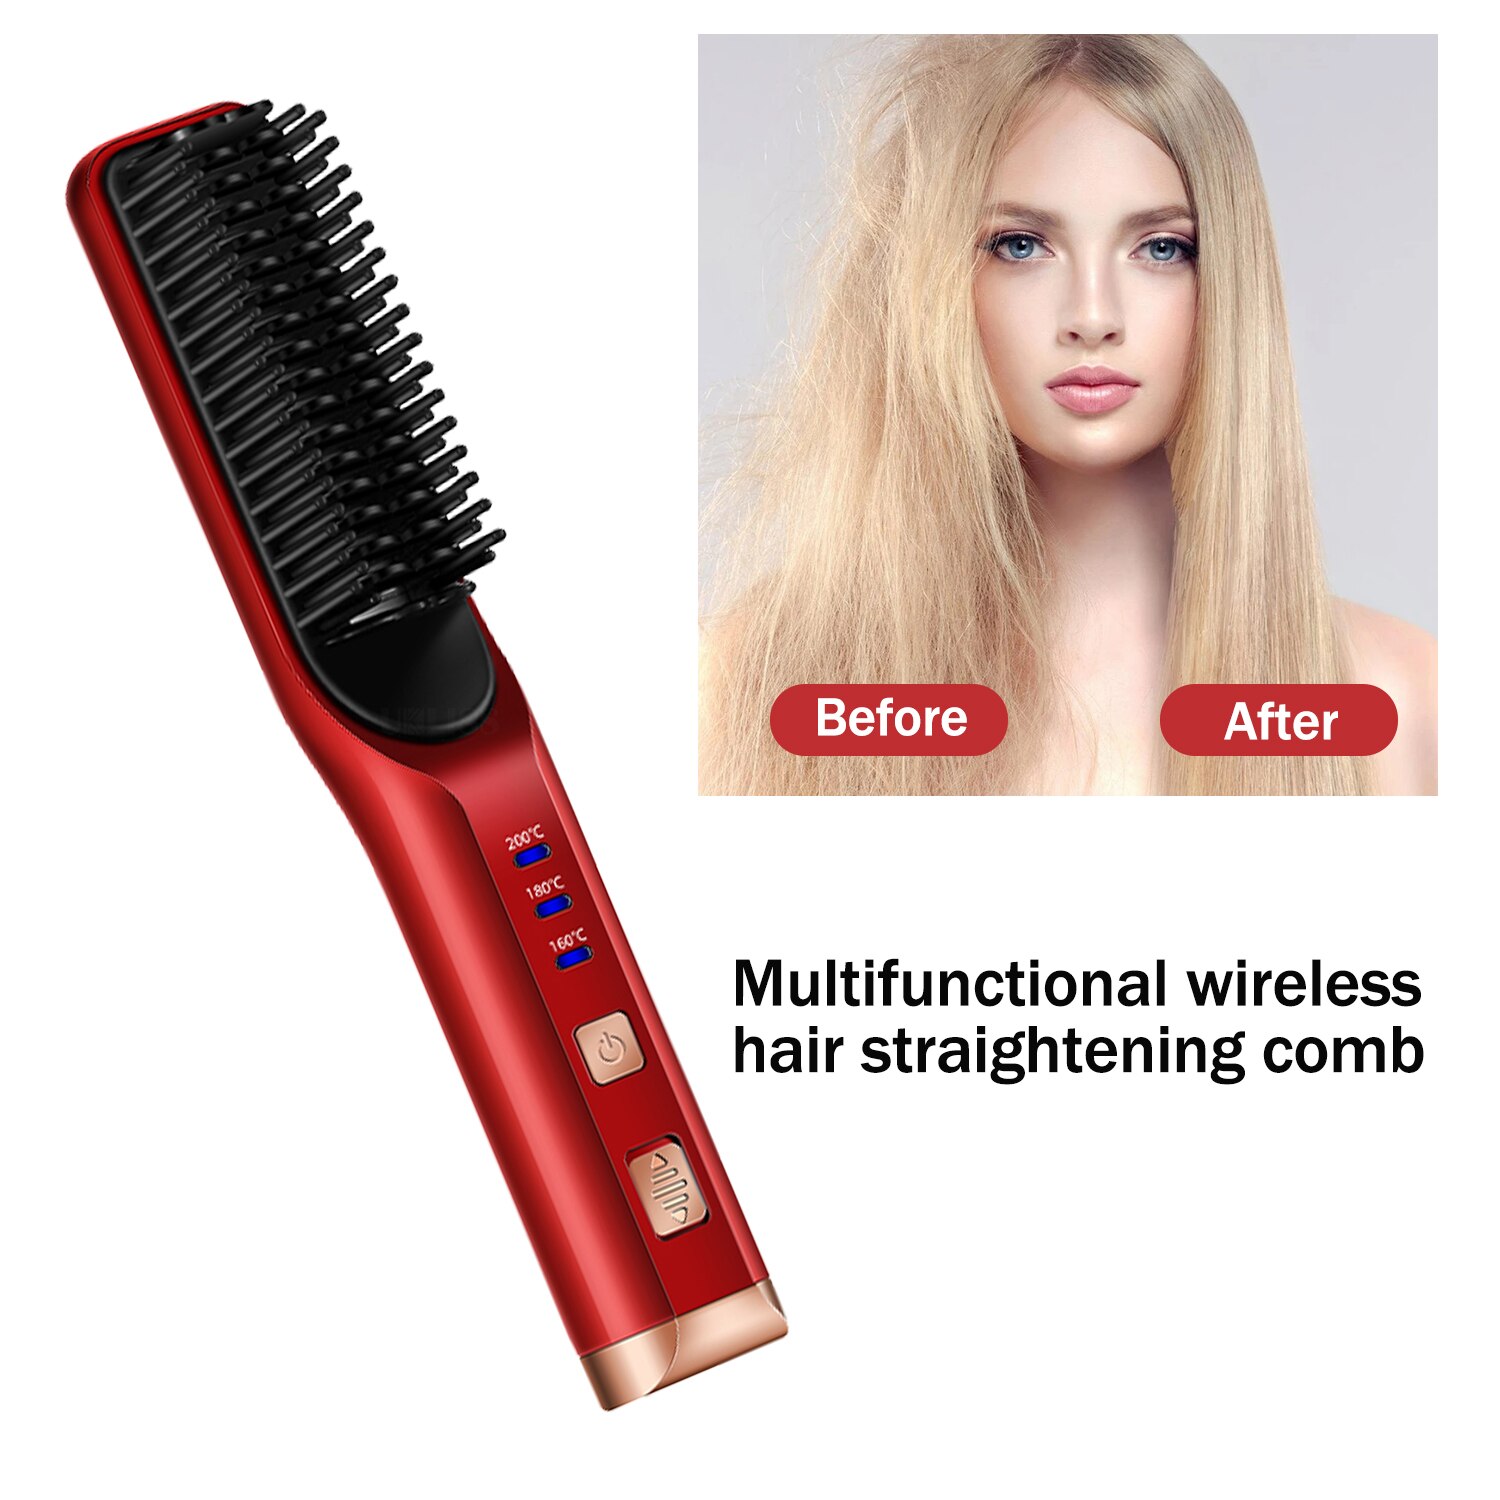 Newly Wireless Hair Straightener Brush Styler Mutilfunction Eletric Hair Straightener Comb Protable USB Rechargeable Flat Iron: Red